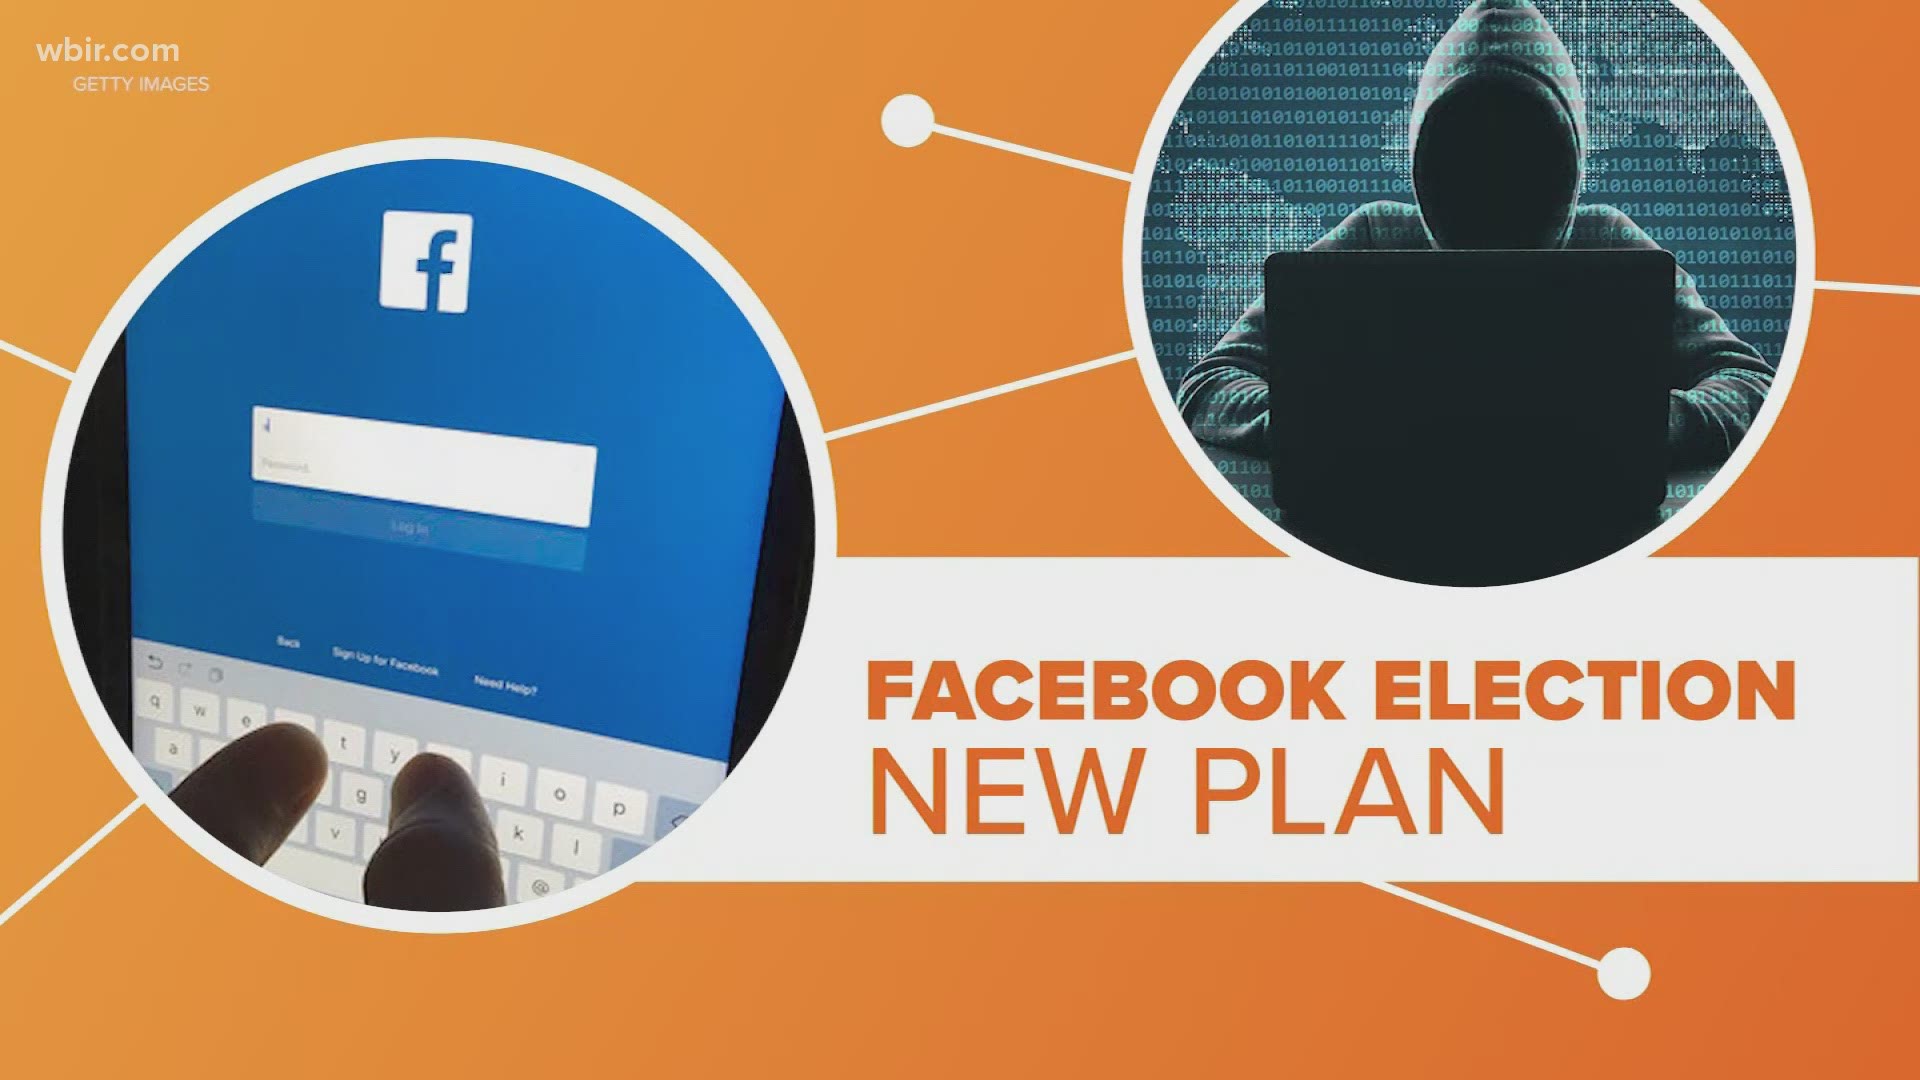 Facebook was at the center of controversy after the 2016 presidential election when word leaked Russian operatives had used the site to influence the race.